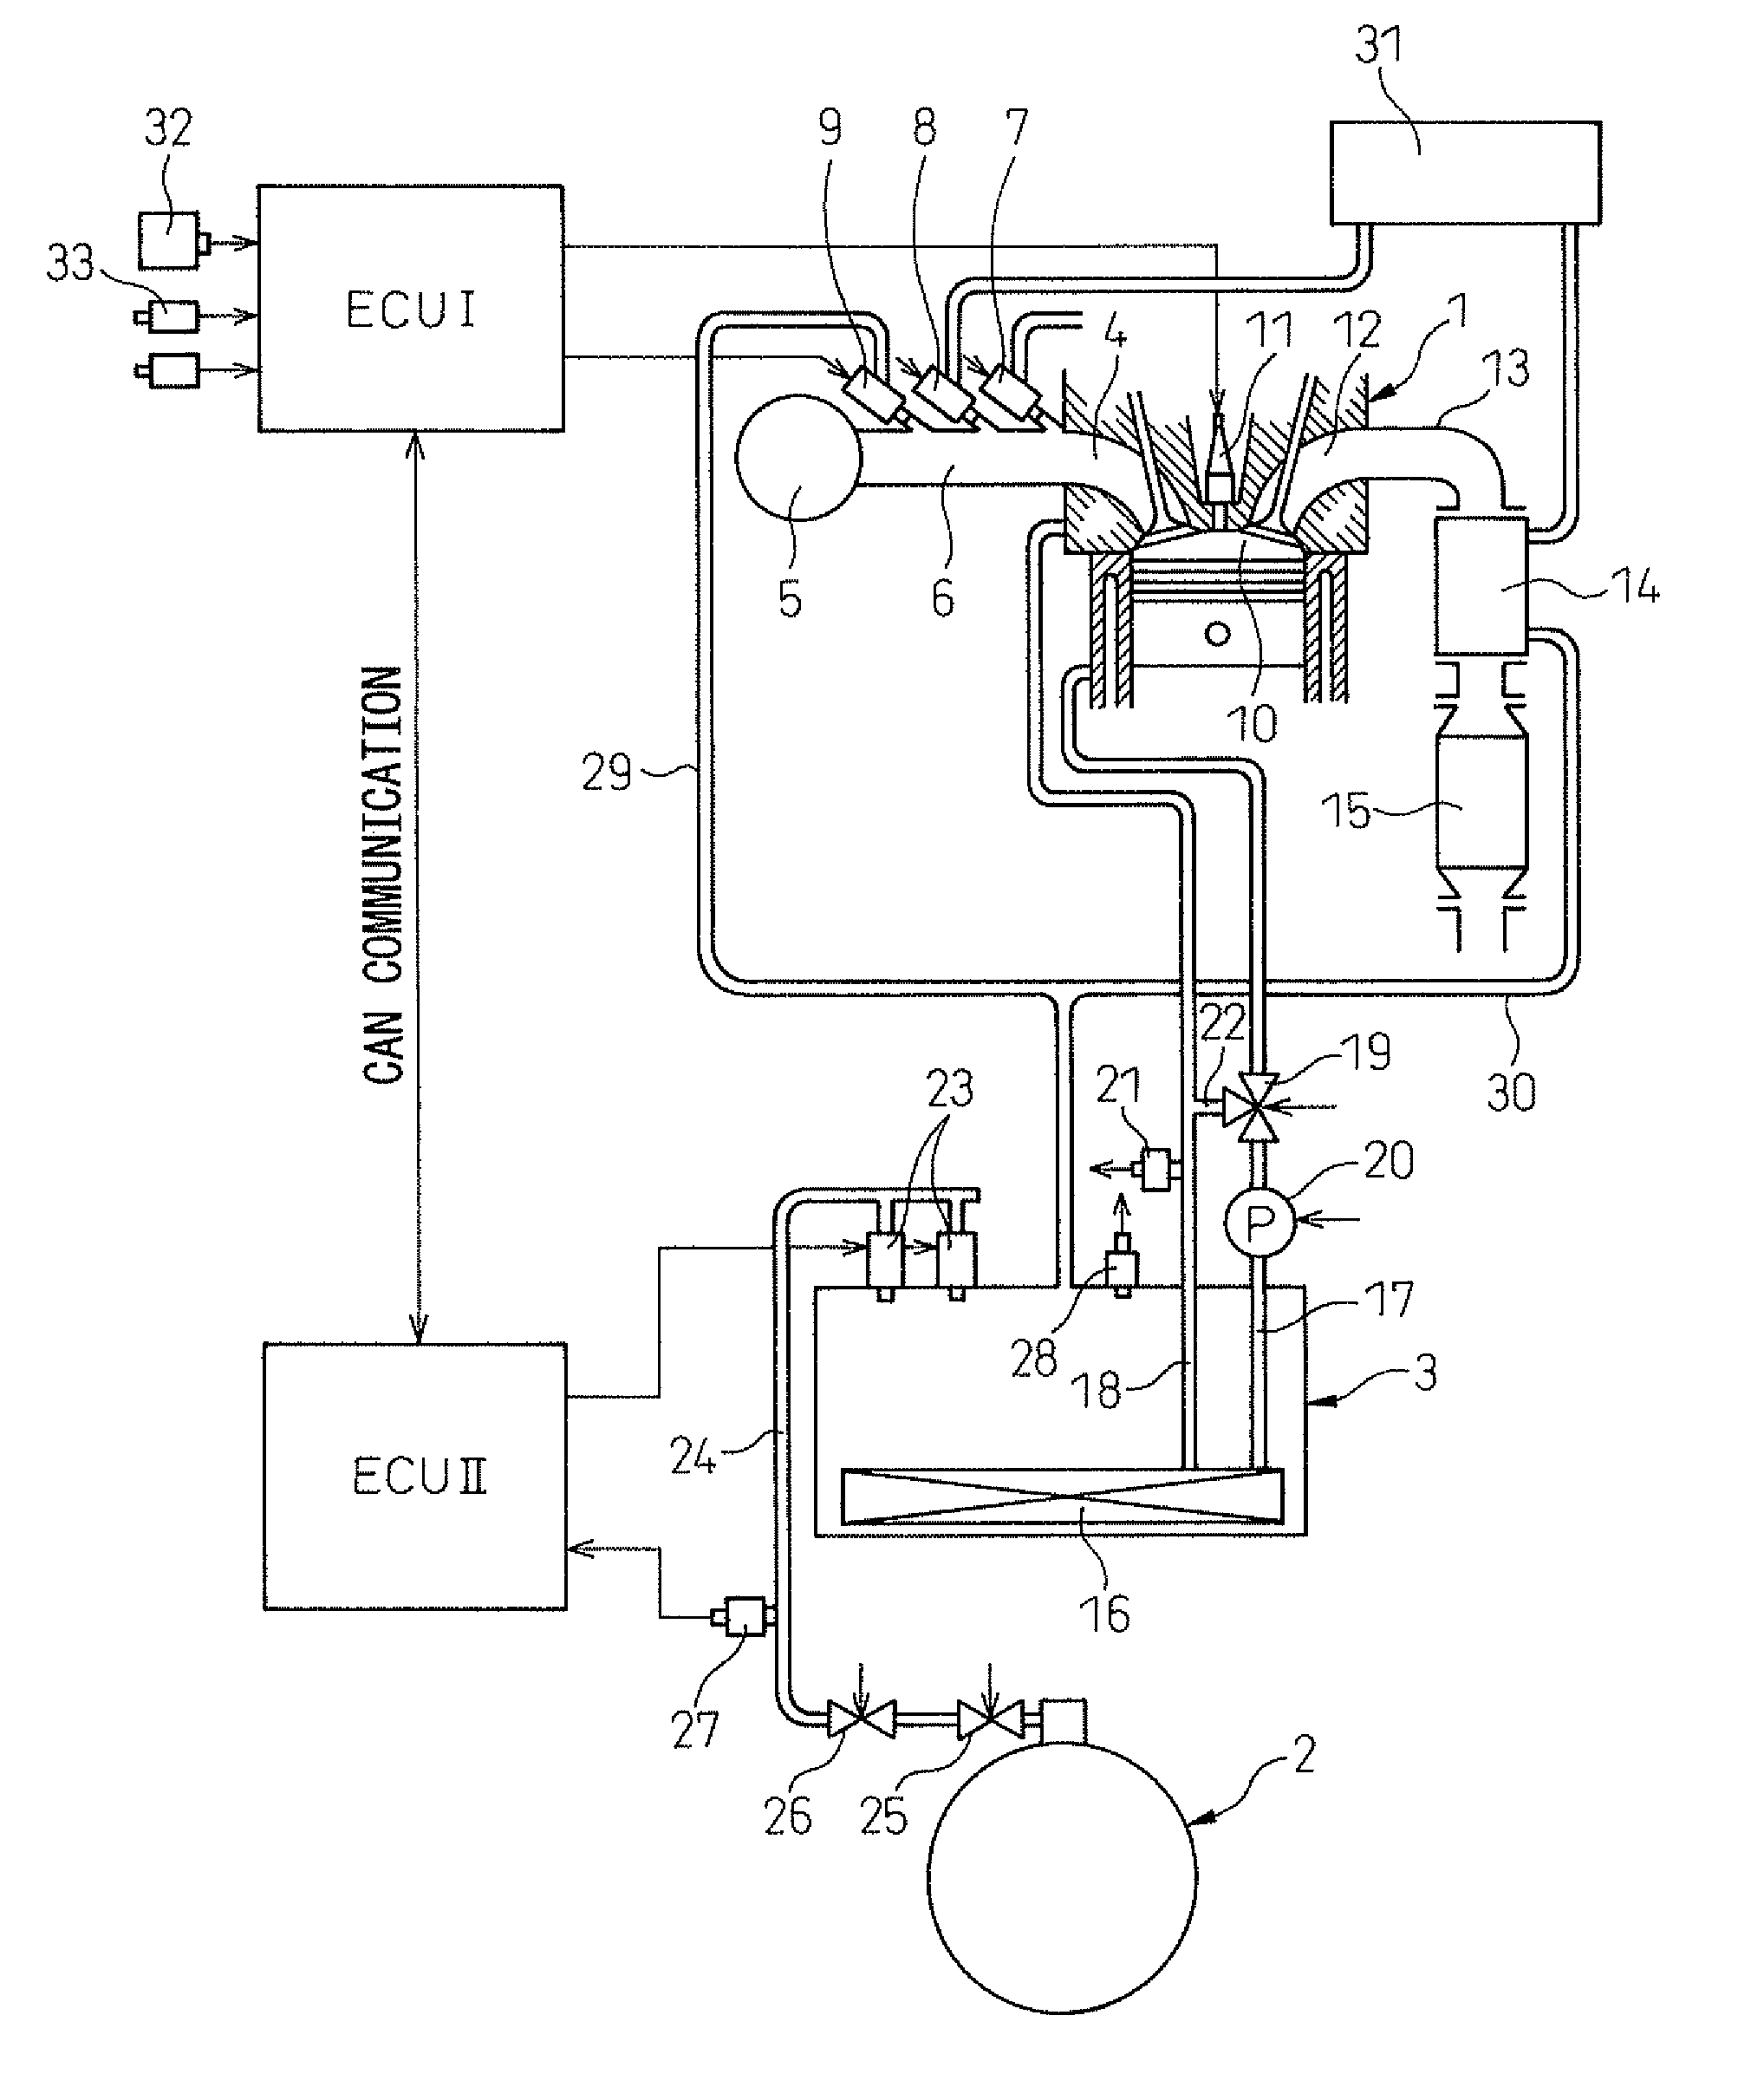 Control device of an internal combustion engine